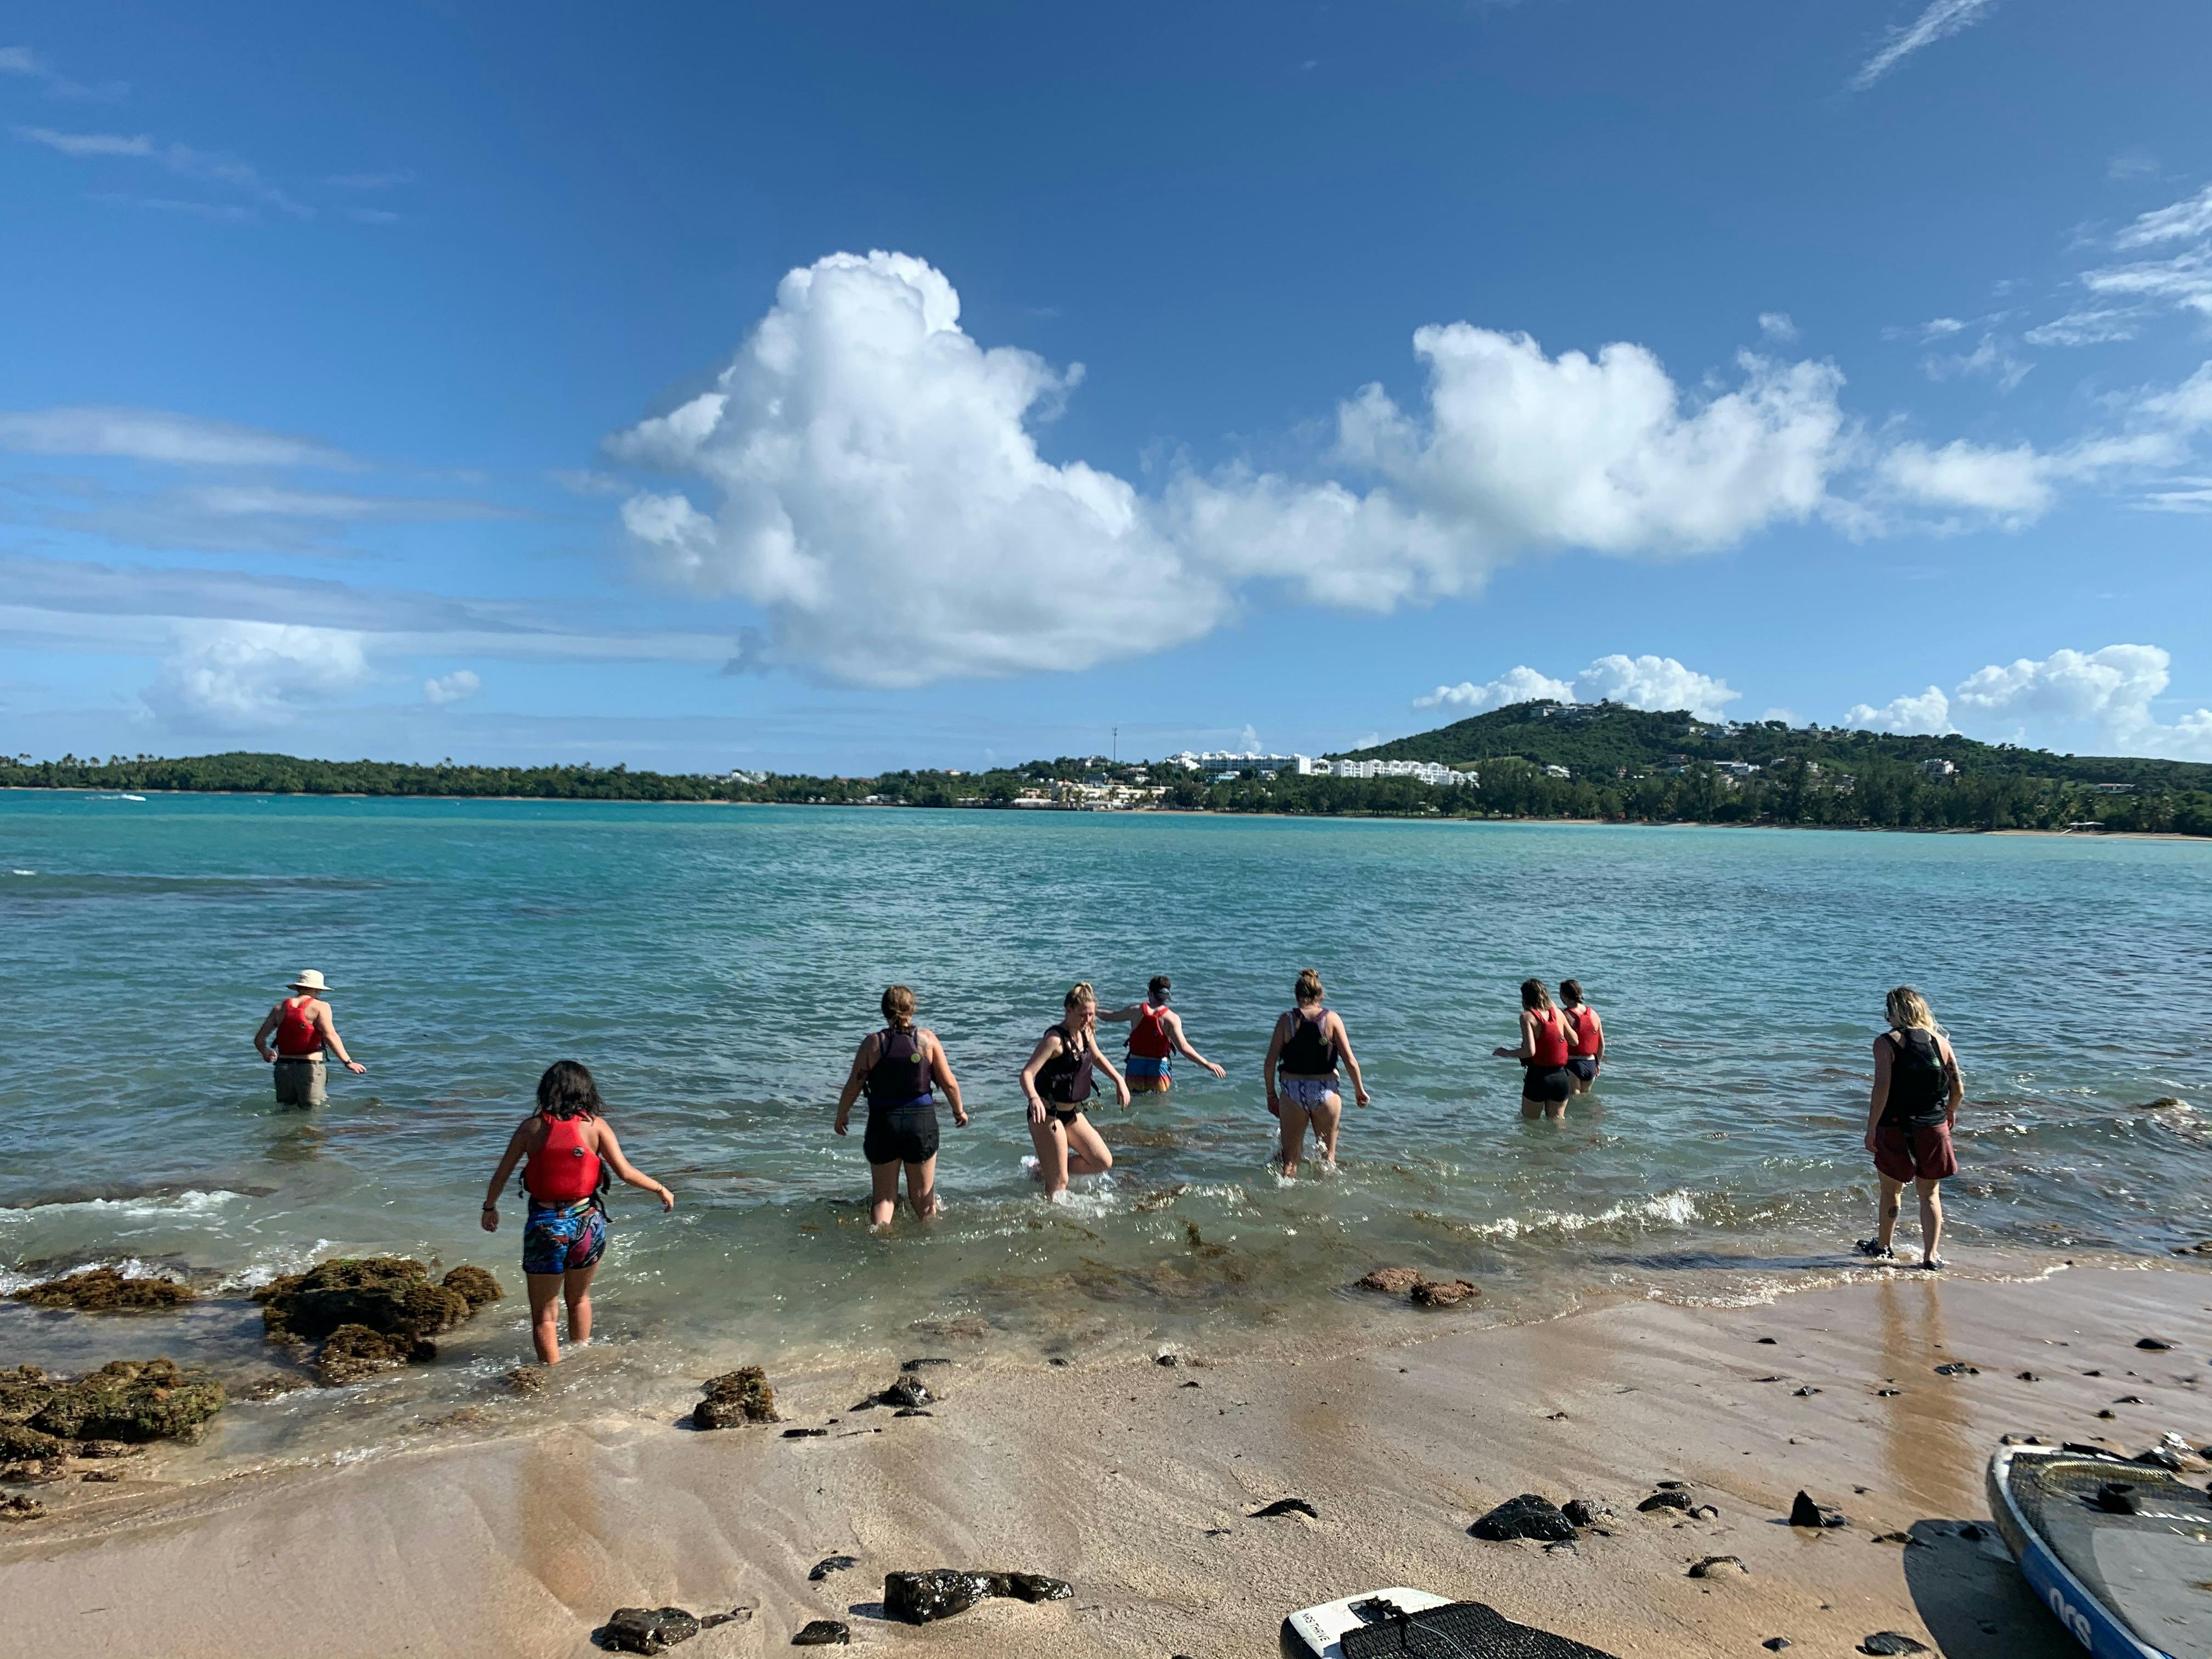 Nine people, four in life jackets, wade into shallow water on a tropical beach. 